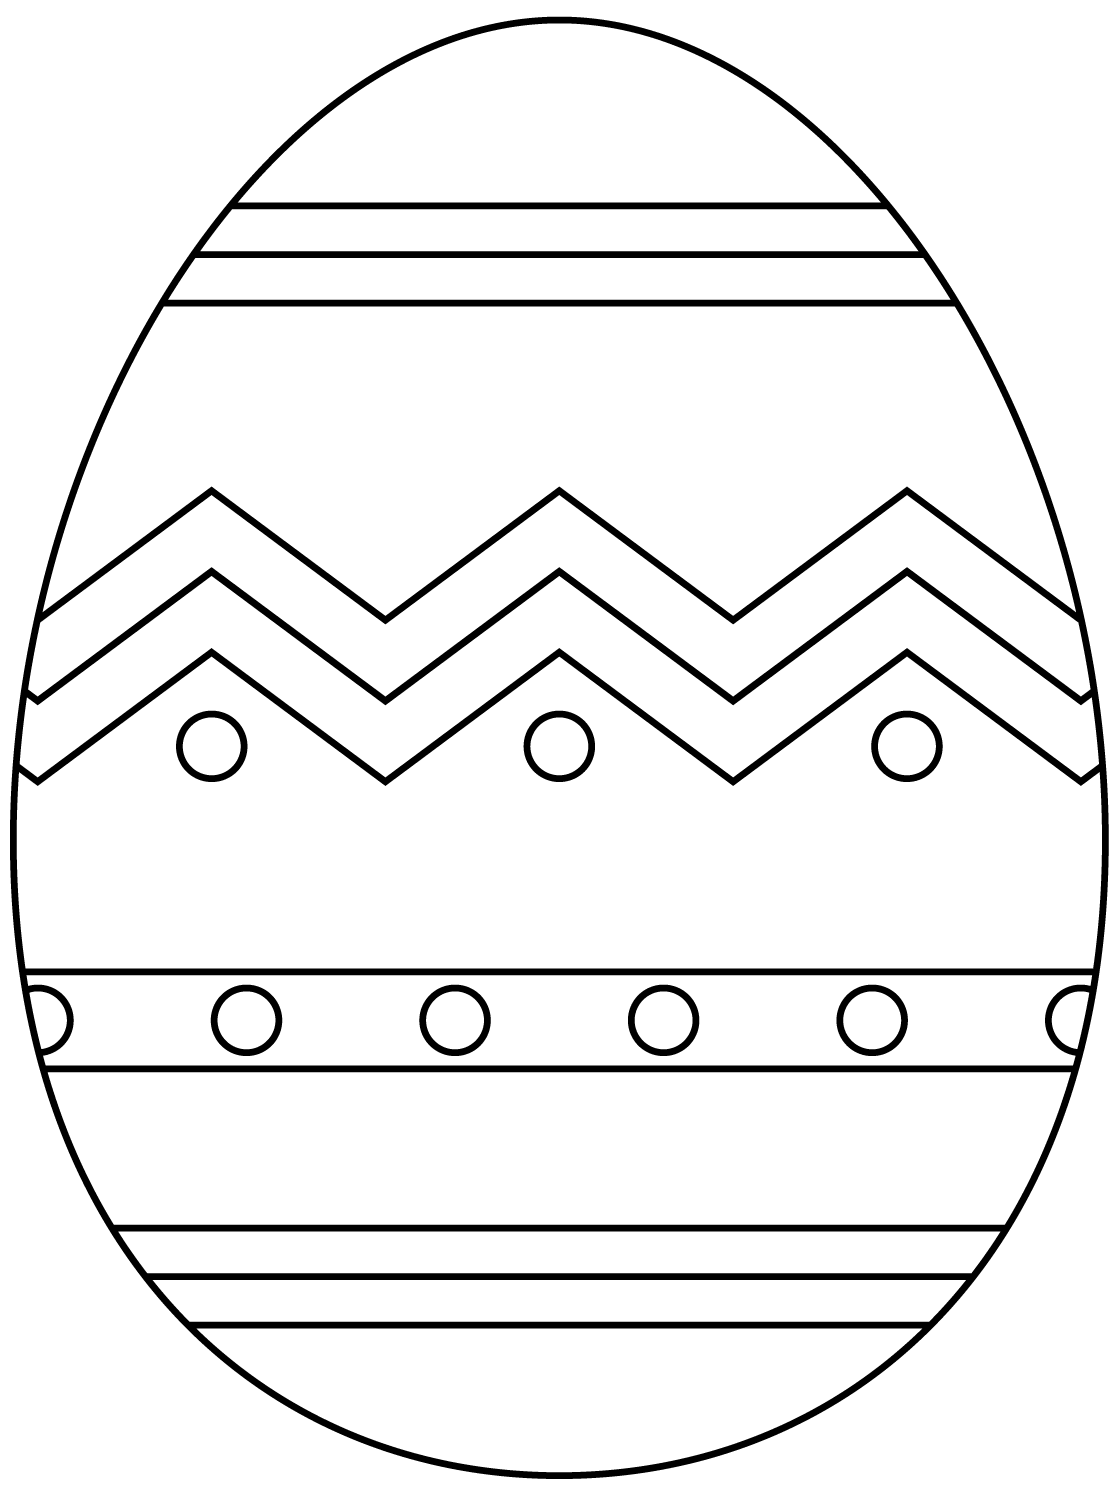 Easter Egg With Abstract Pattern 1